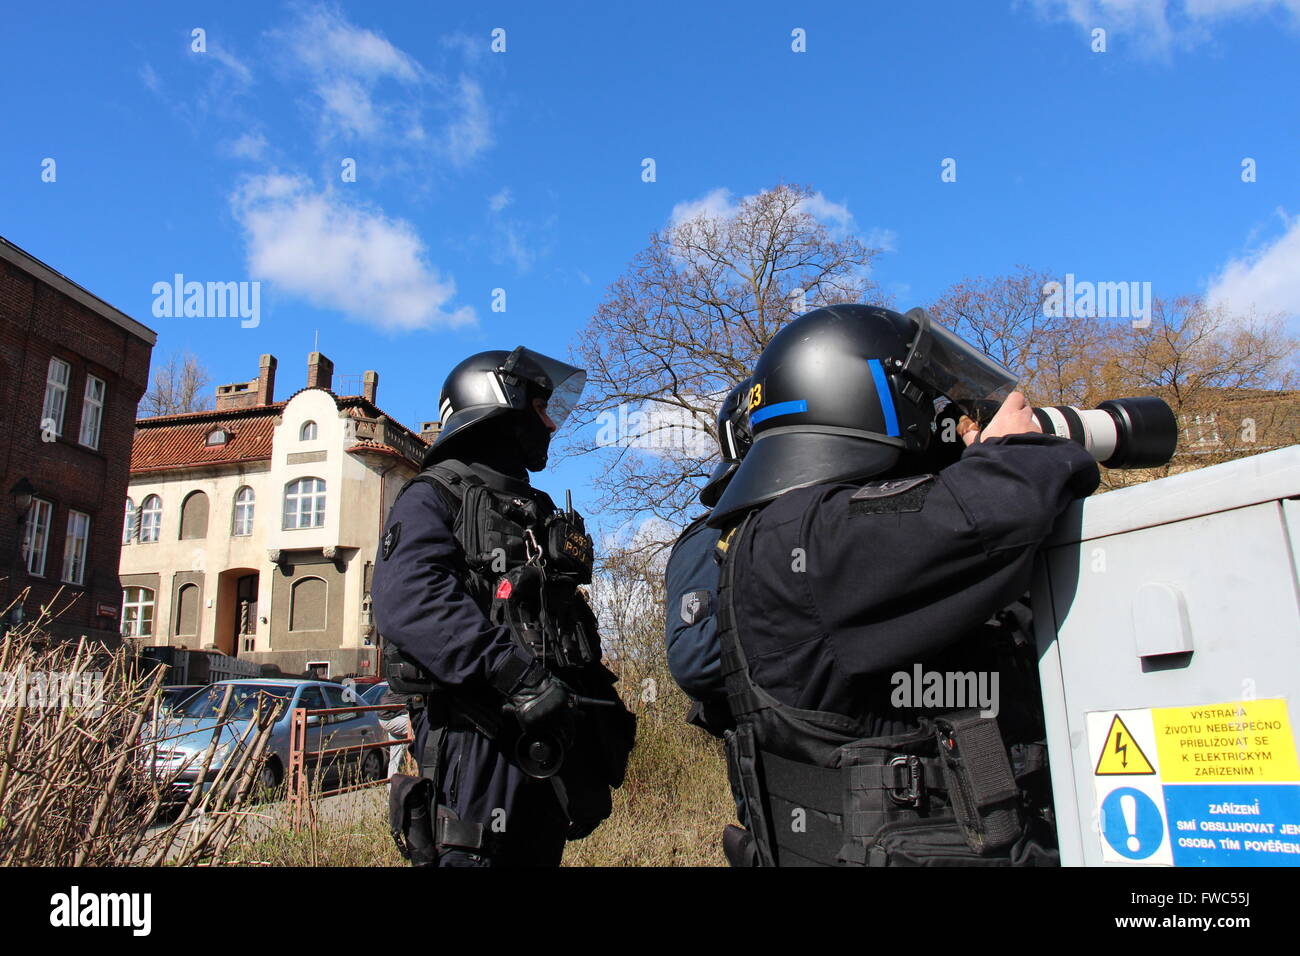 On 29 March 2016, On Badeniho Street near Prague's Mickiewiczova Street, the Czech riot police regularly took photos of protests Stock Photo